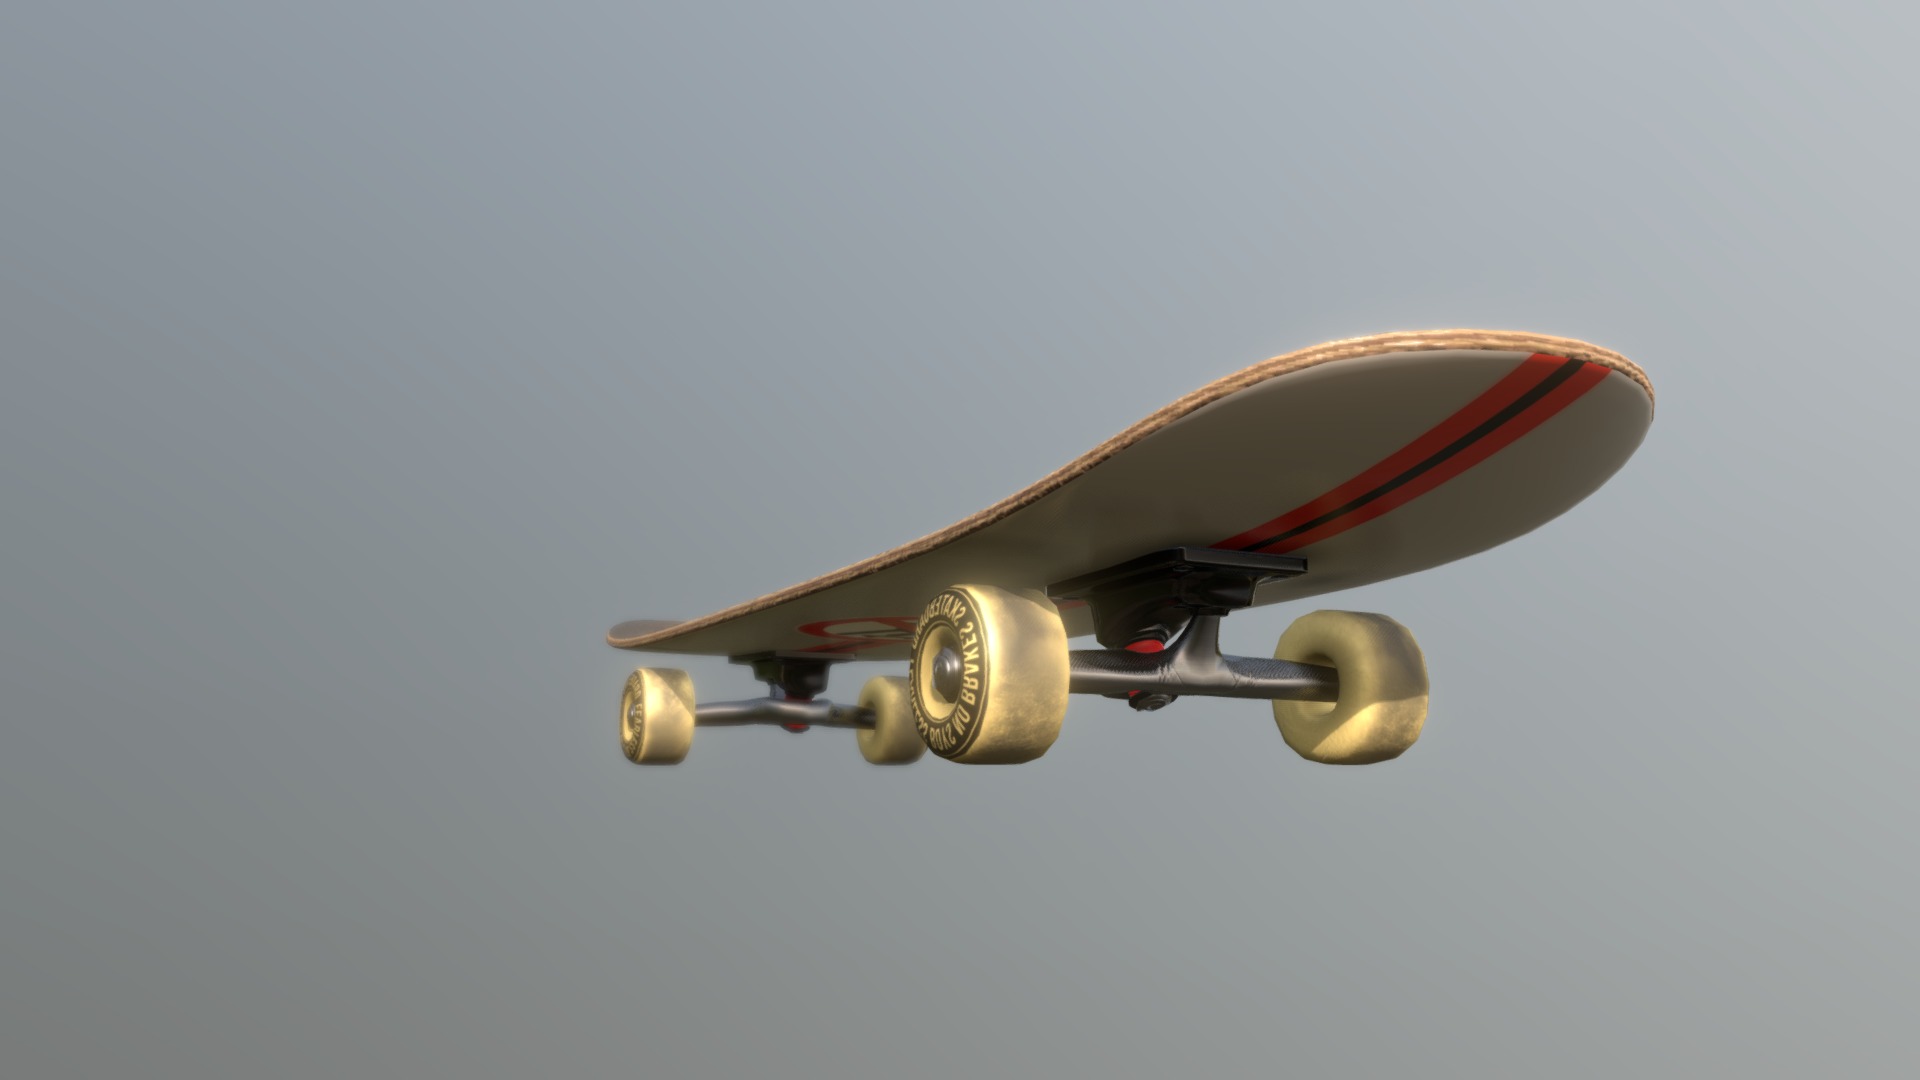 3D model Skateboard "No Skateboarding" - This is a 3D model of the Skateboard "No Skateboarding". The 3D model is about a ceiling fan with a red and white striped design.